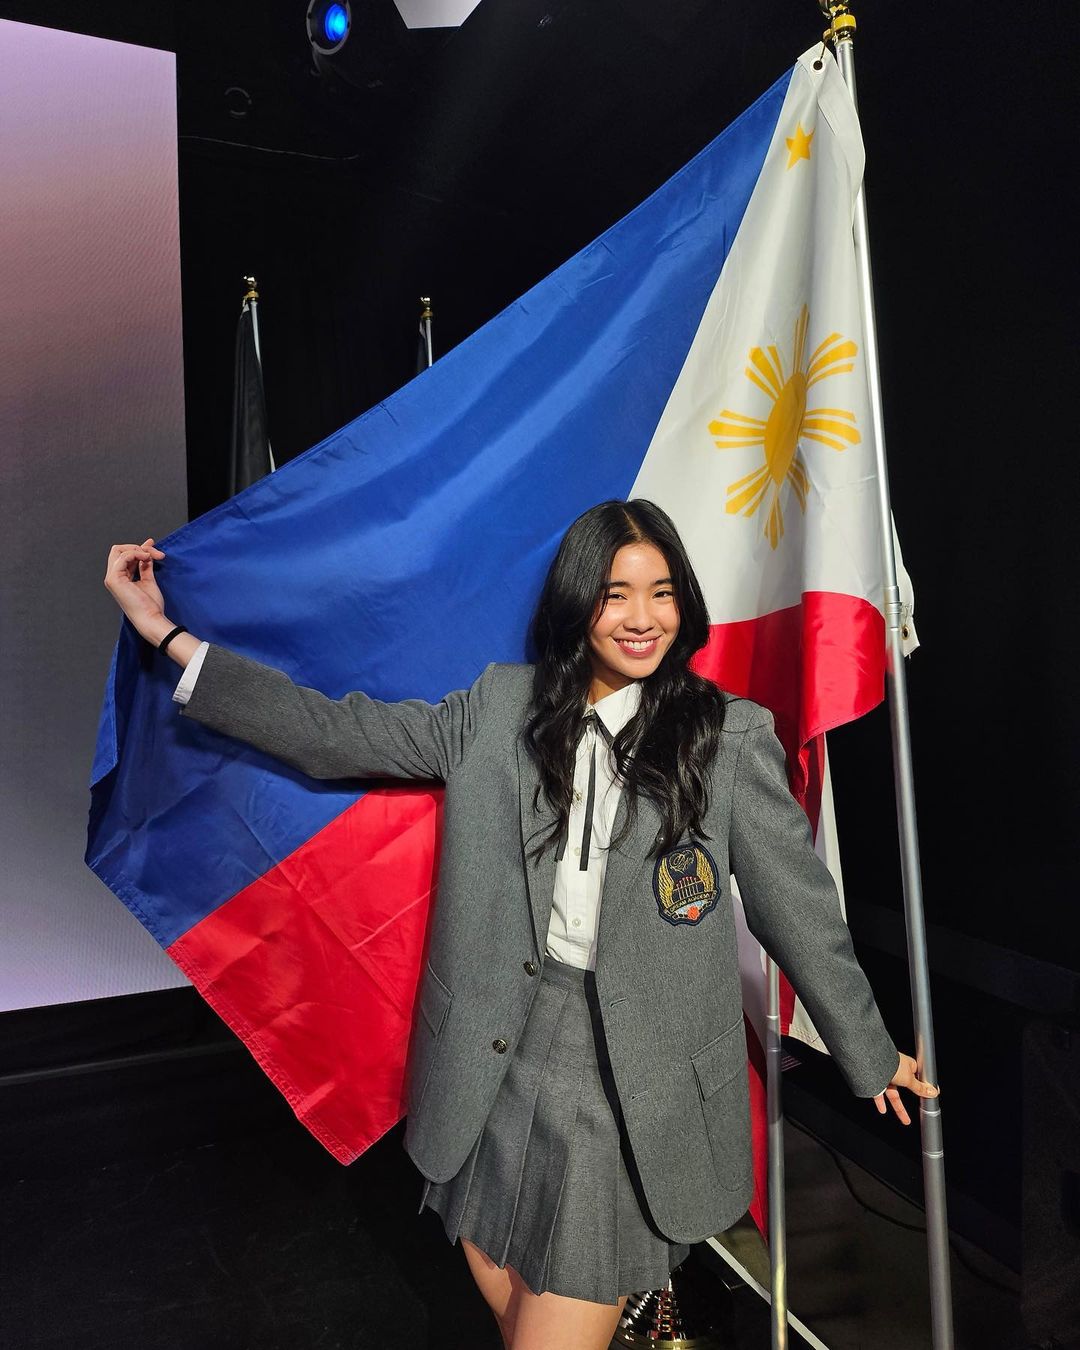 Laforteza representing the Philippines as the first Filipino talent under HYBE